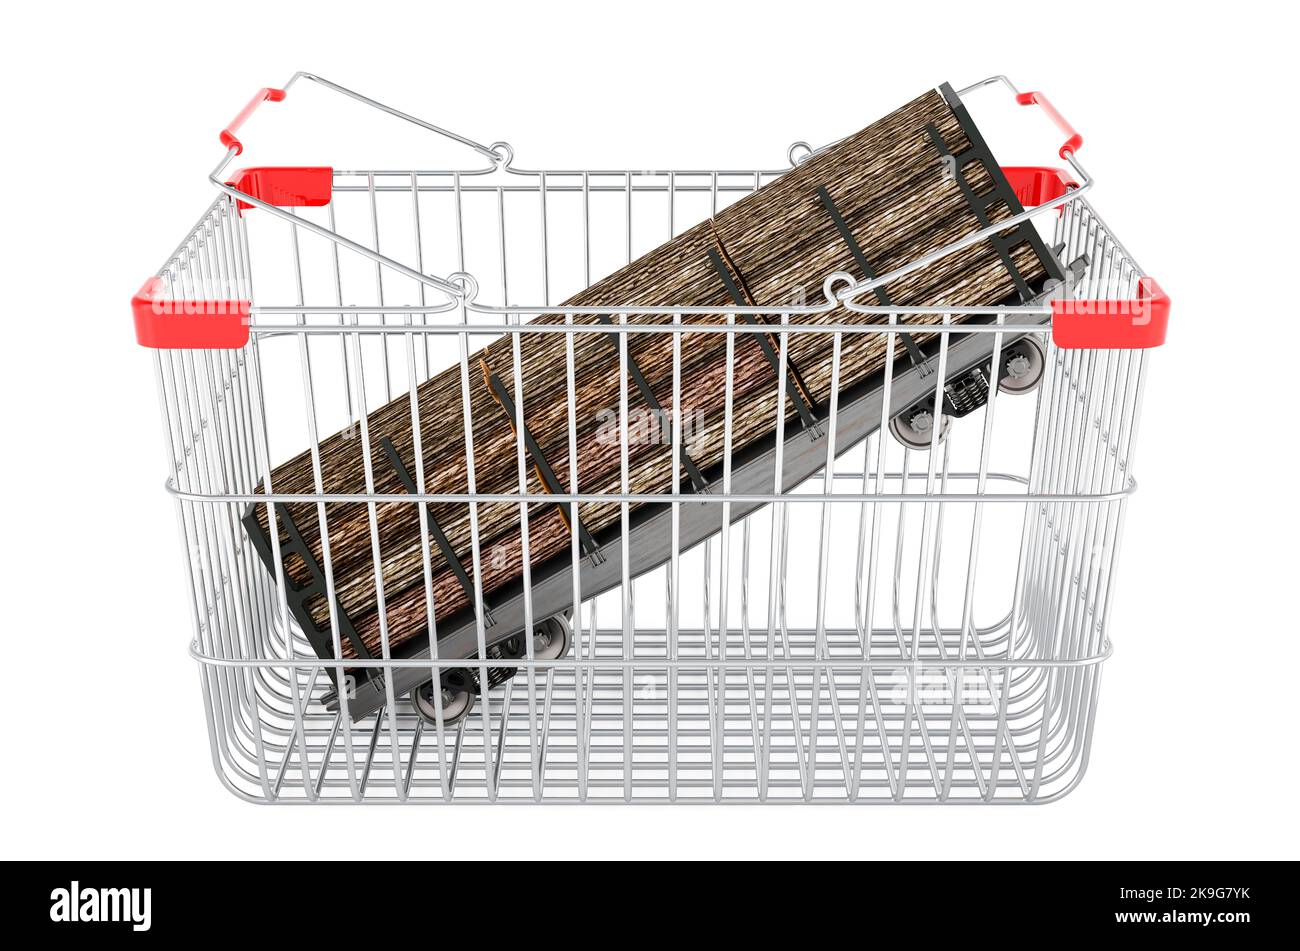 Shopping basket with goods wagon full of wooden logs, 3D rendering isolated on white background Stock Photo